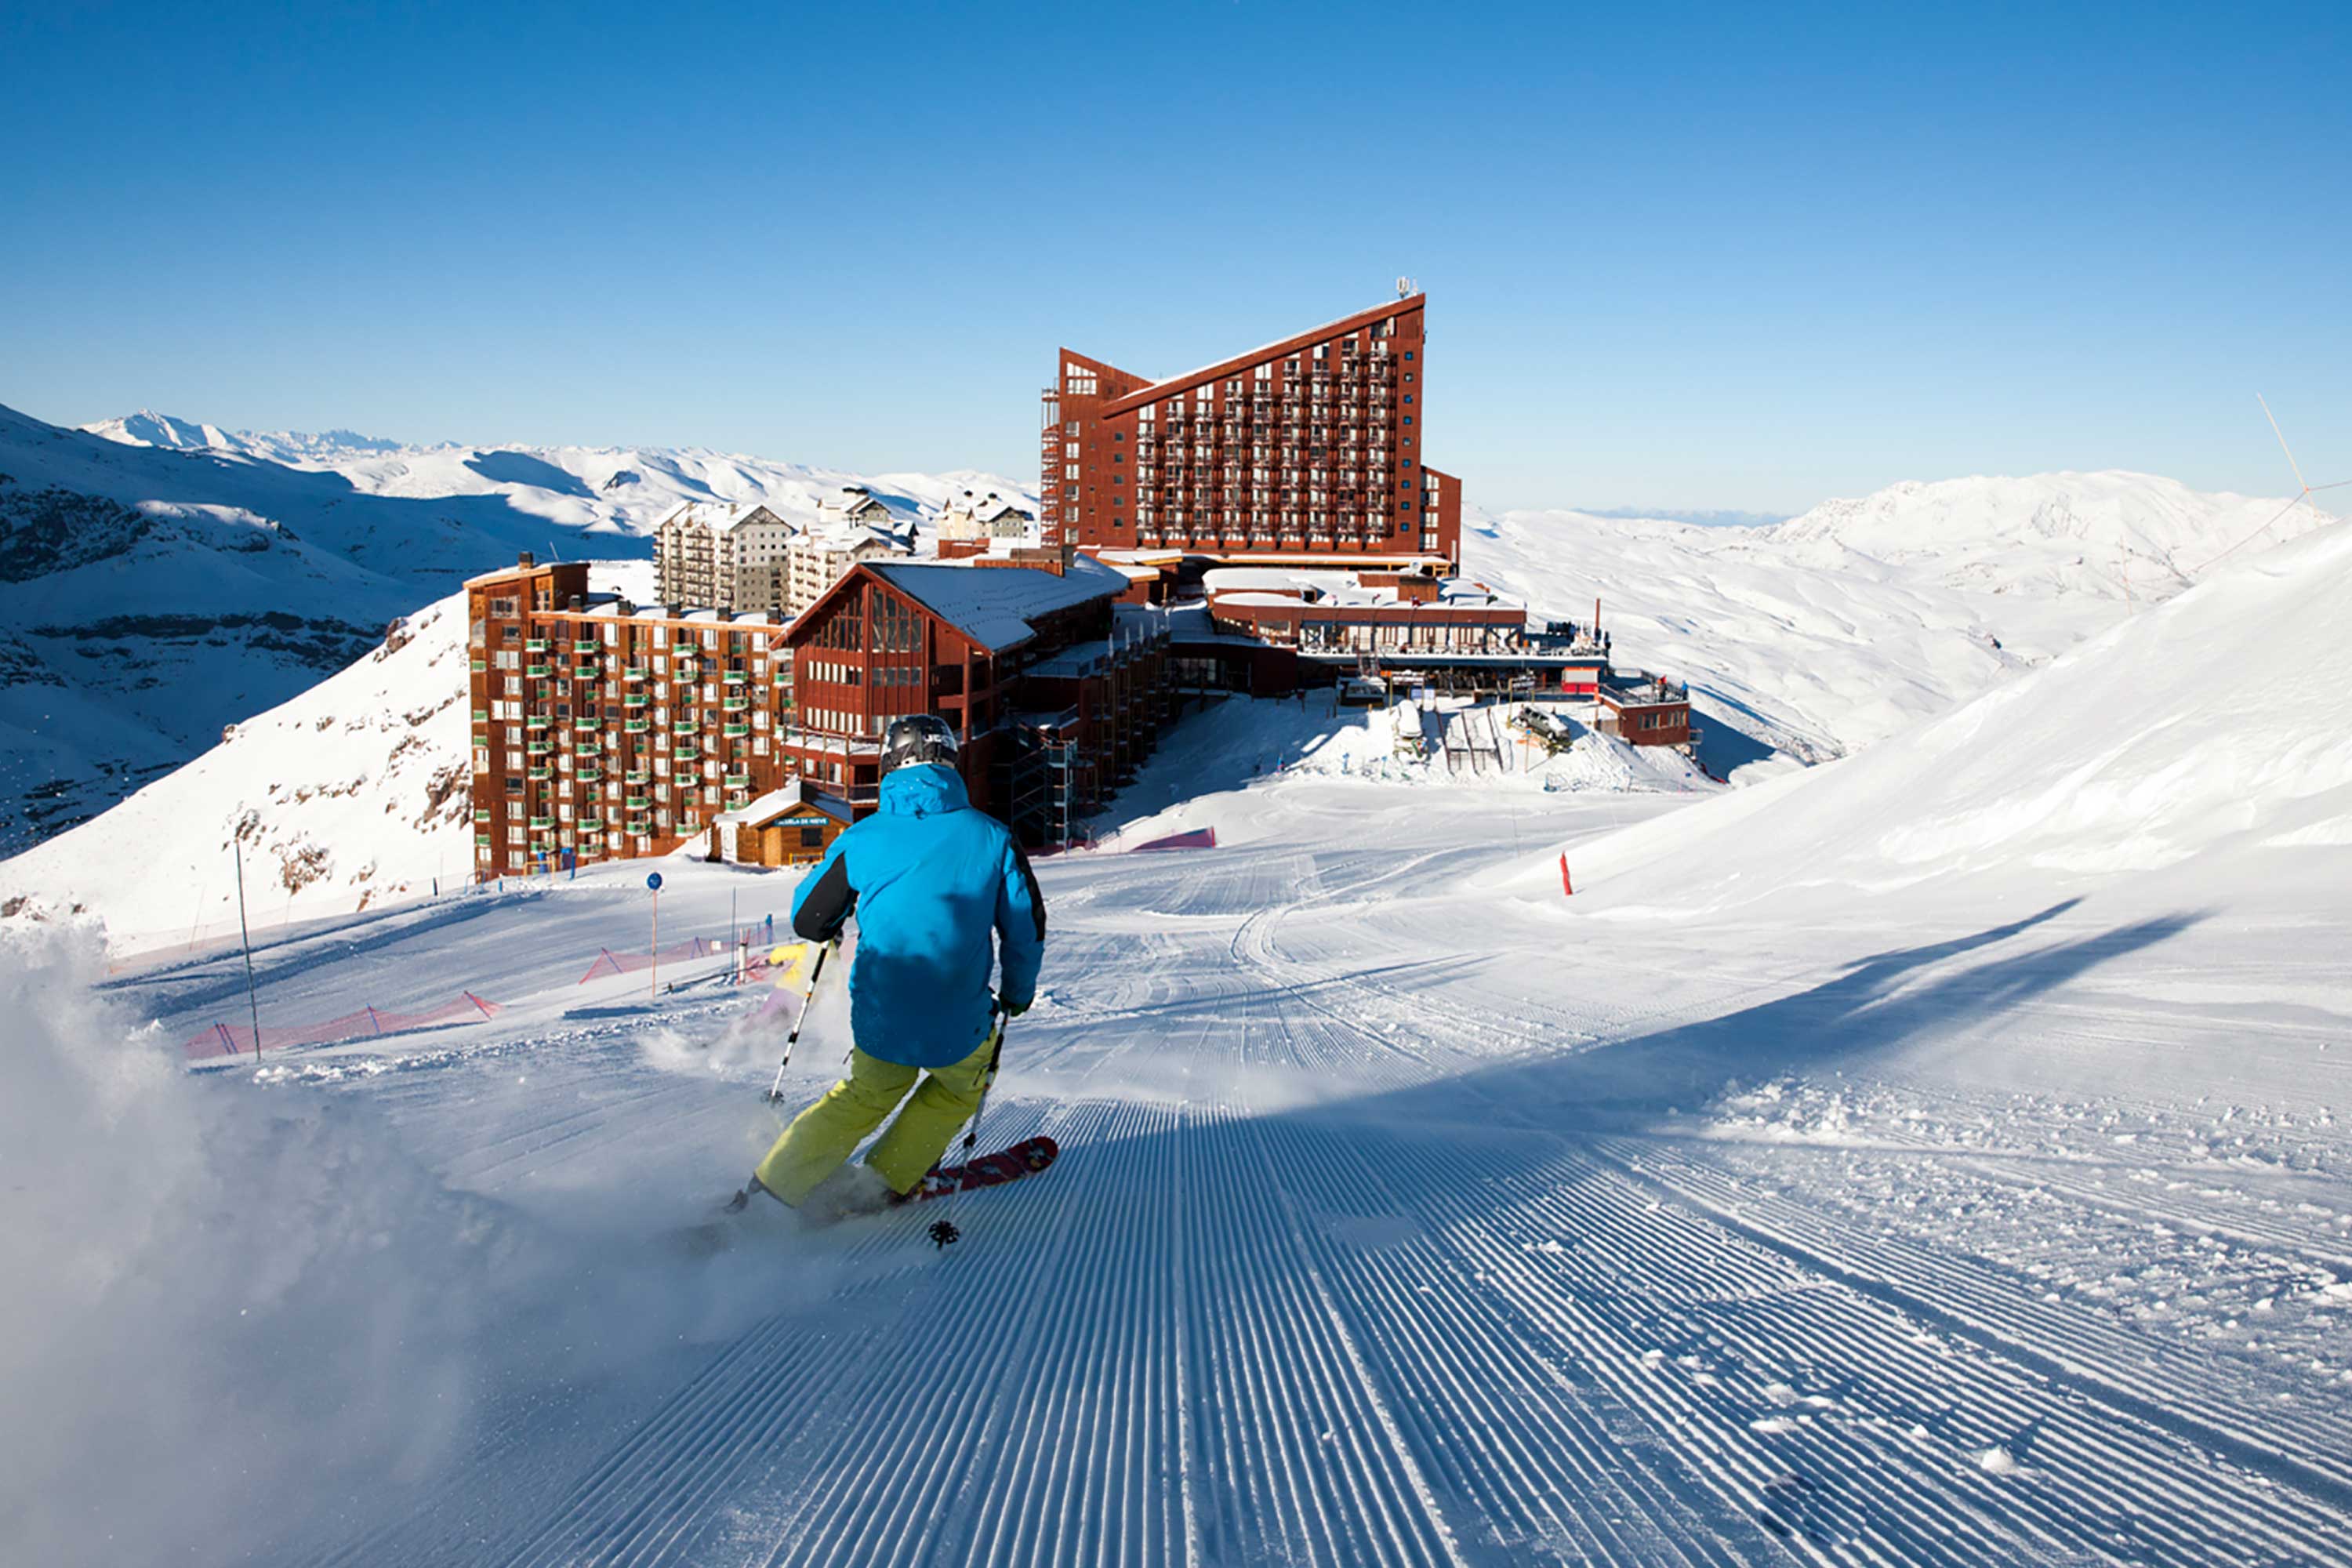 Valle Nevado Mountain Resort on the slopes of chile